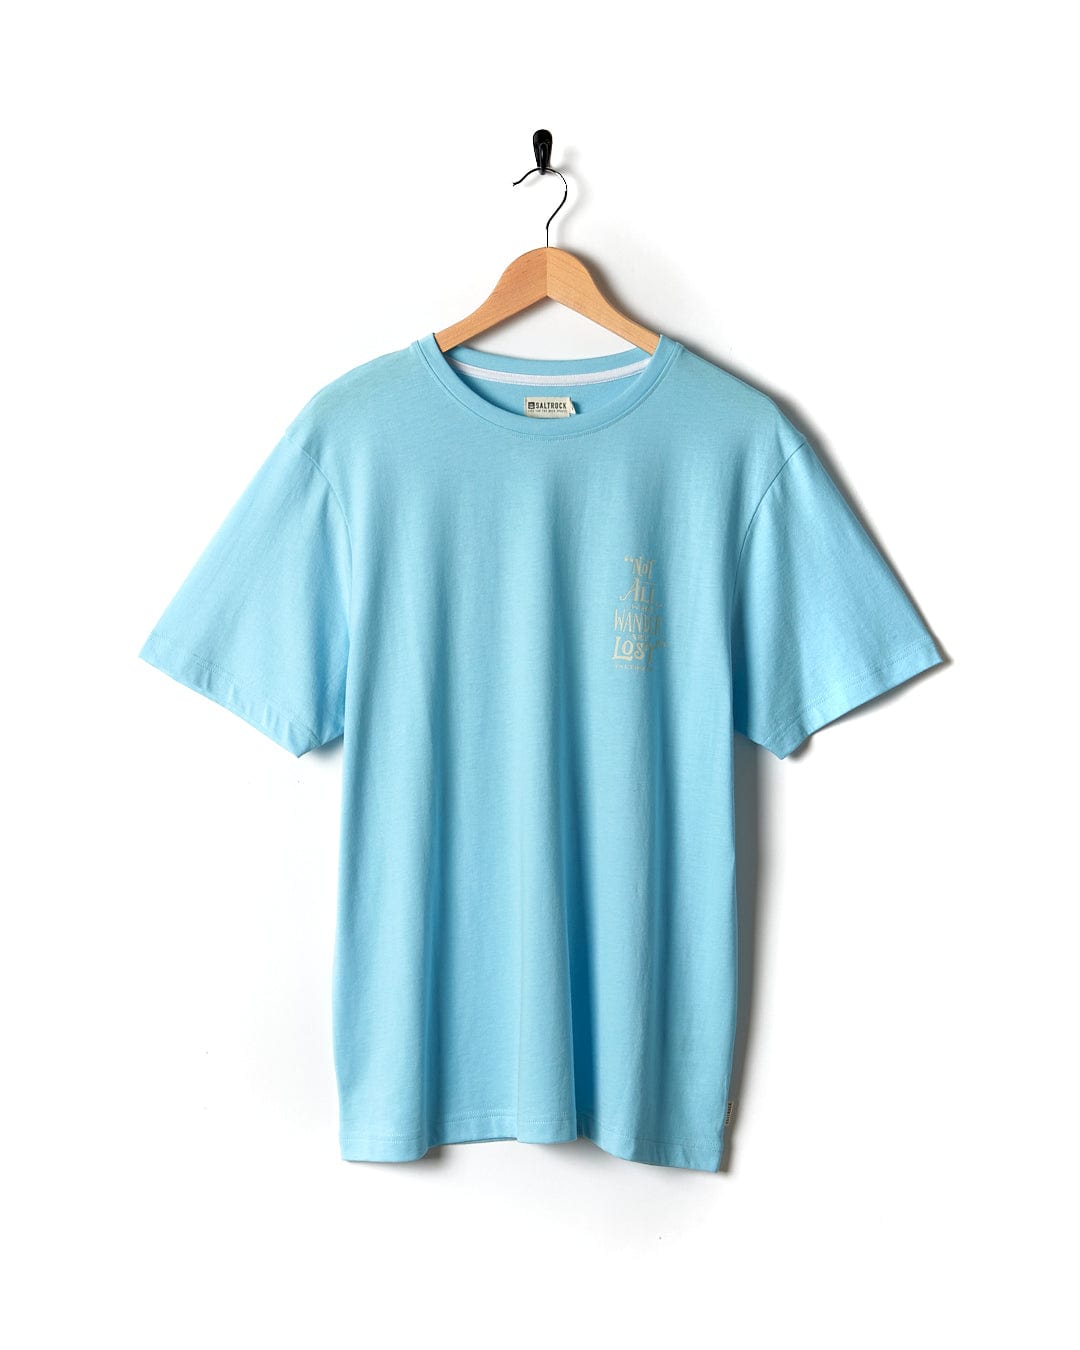 A light blue Lost Ships - Mens Short Sleeve T-Shirt in Turquoise hanging on a wooden hanger. (Saltrock)